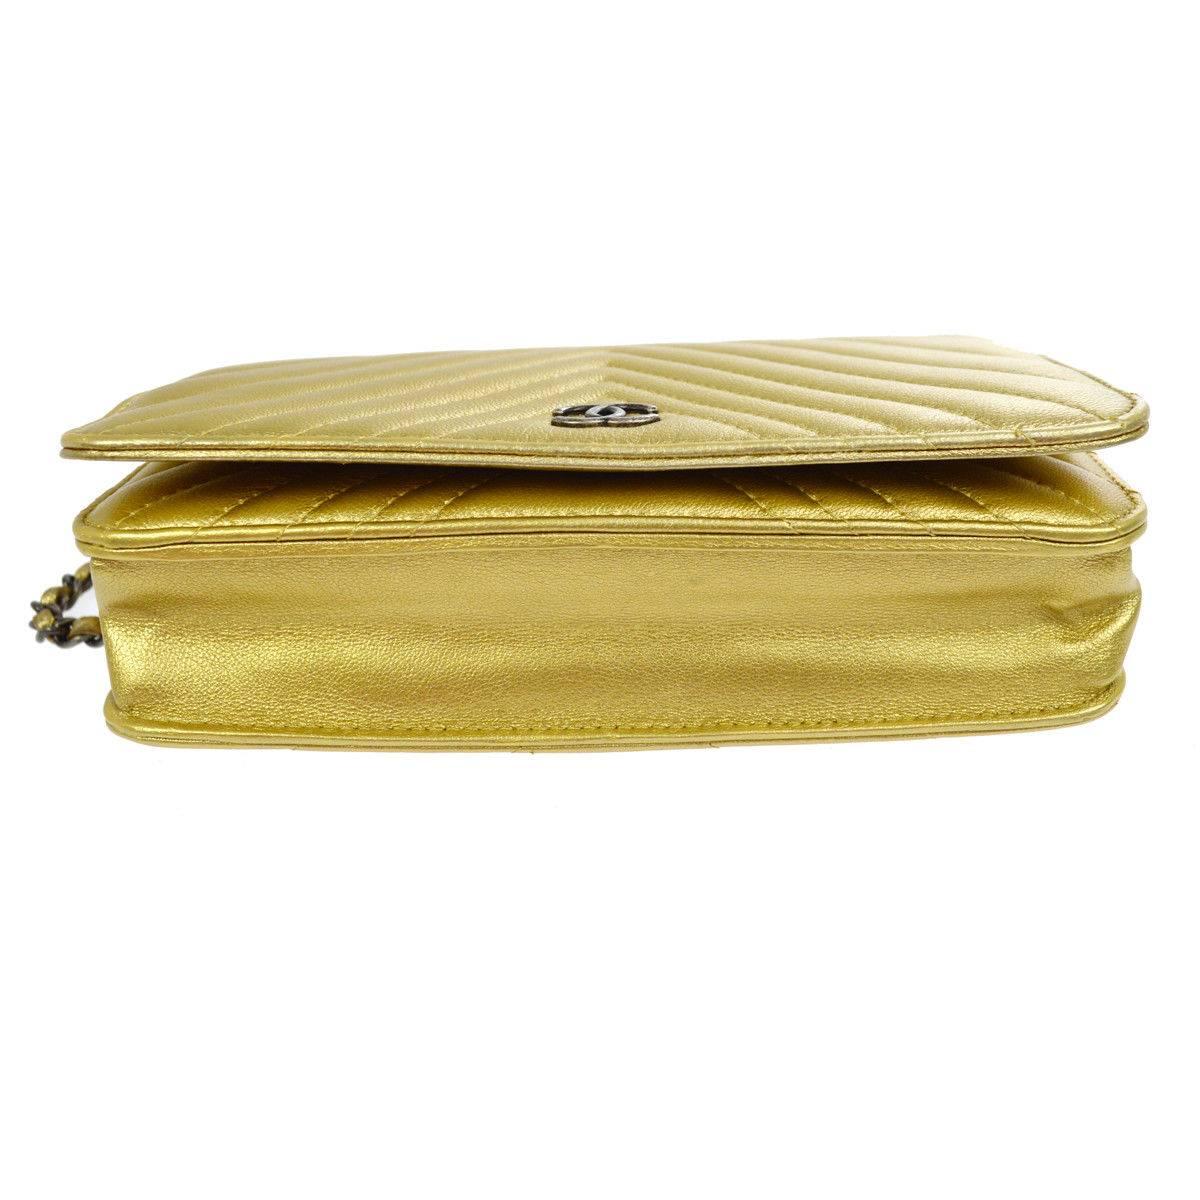 Chanel Gold Leather Chevron Wallet on Chain Clutch Evening Shoulder Flap Bag 1